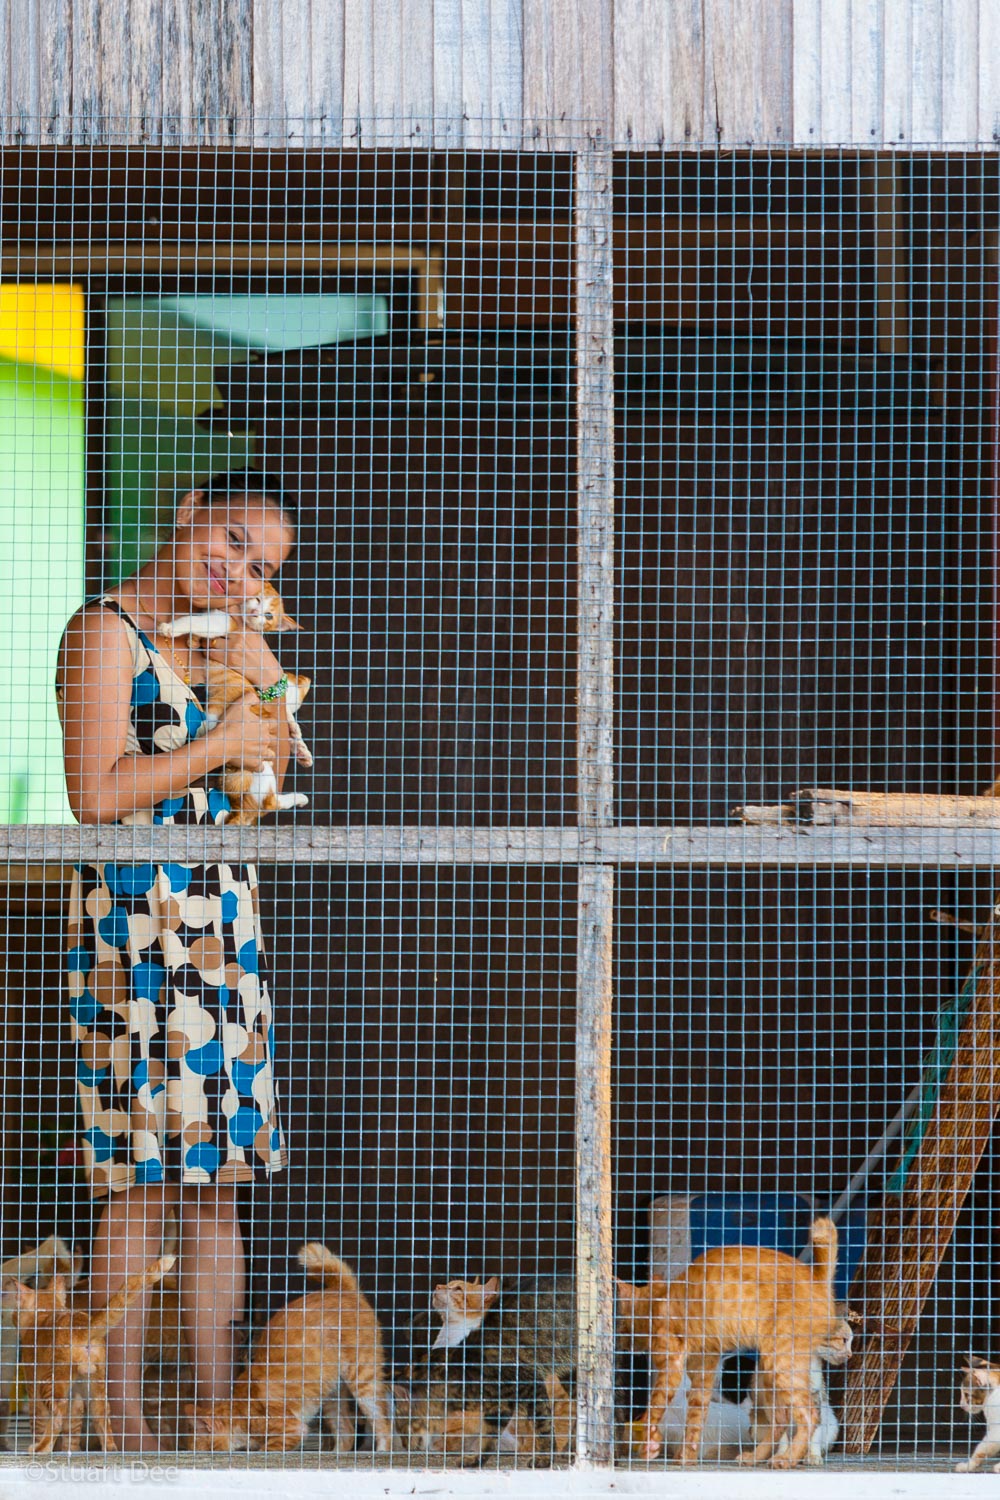  Woman with her pet cats, Buli Sim Sim water village, Sandakan, Sabah, Malaysia. Sandakan is the second largest city in Sabah (after KK) and is a gateway to many ecotourism destinations. 